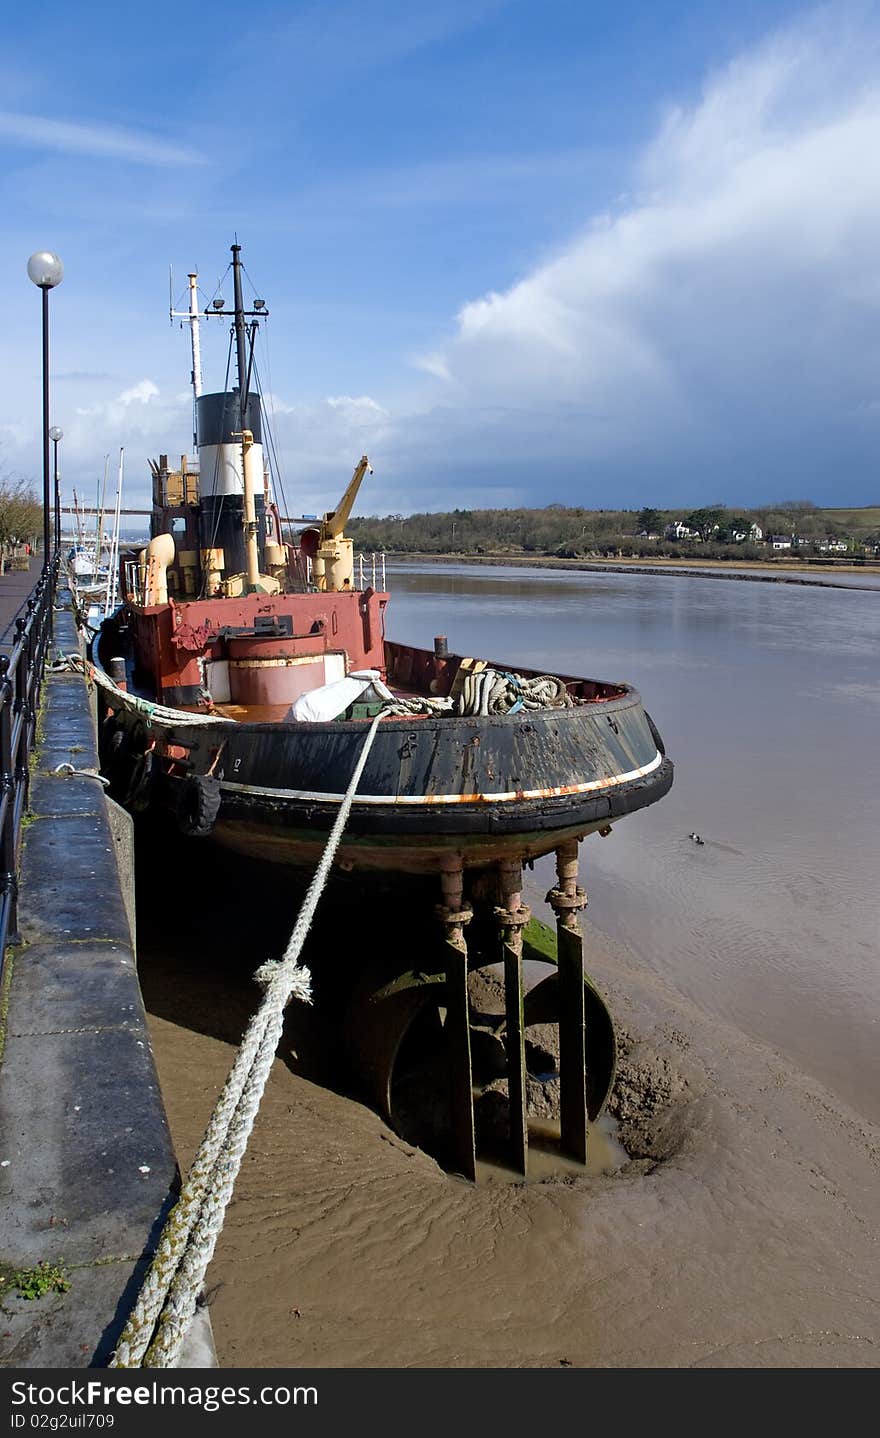 Old tug boat moored by a river bank. Old tug boat moored by a river bank.